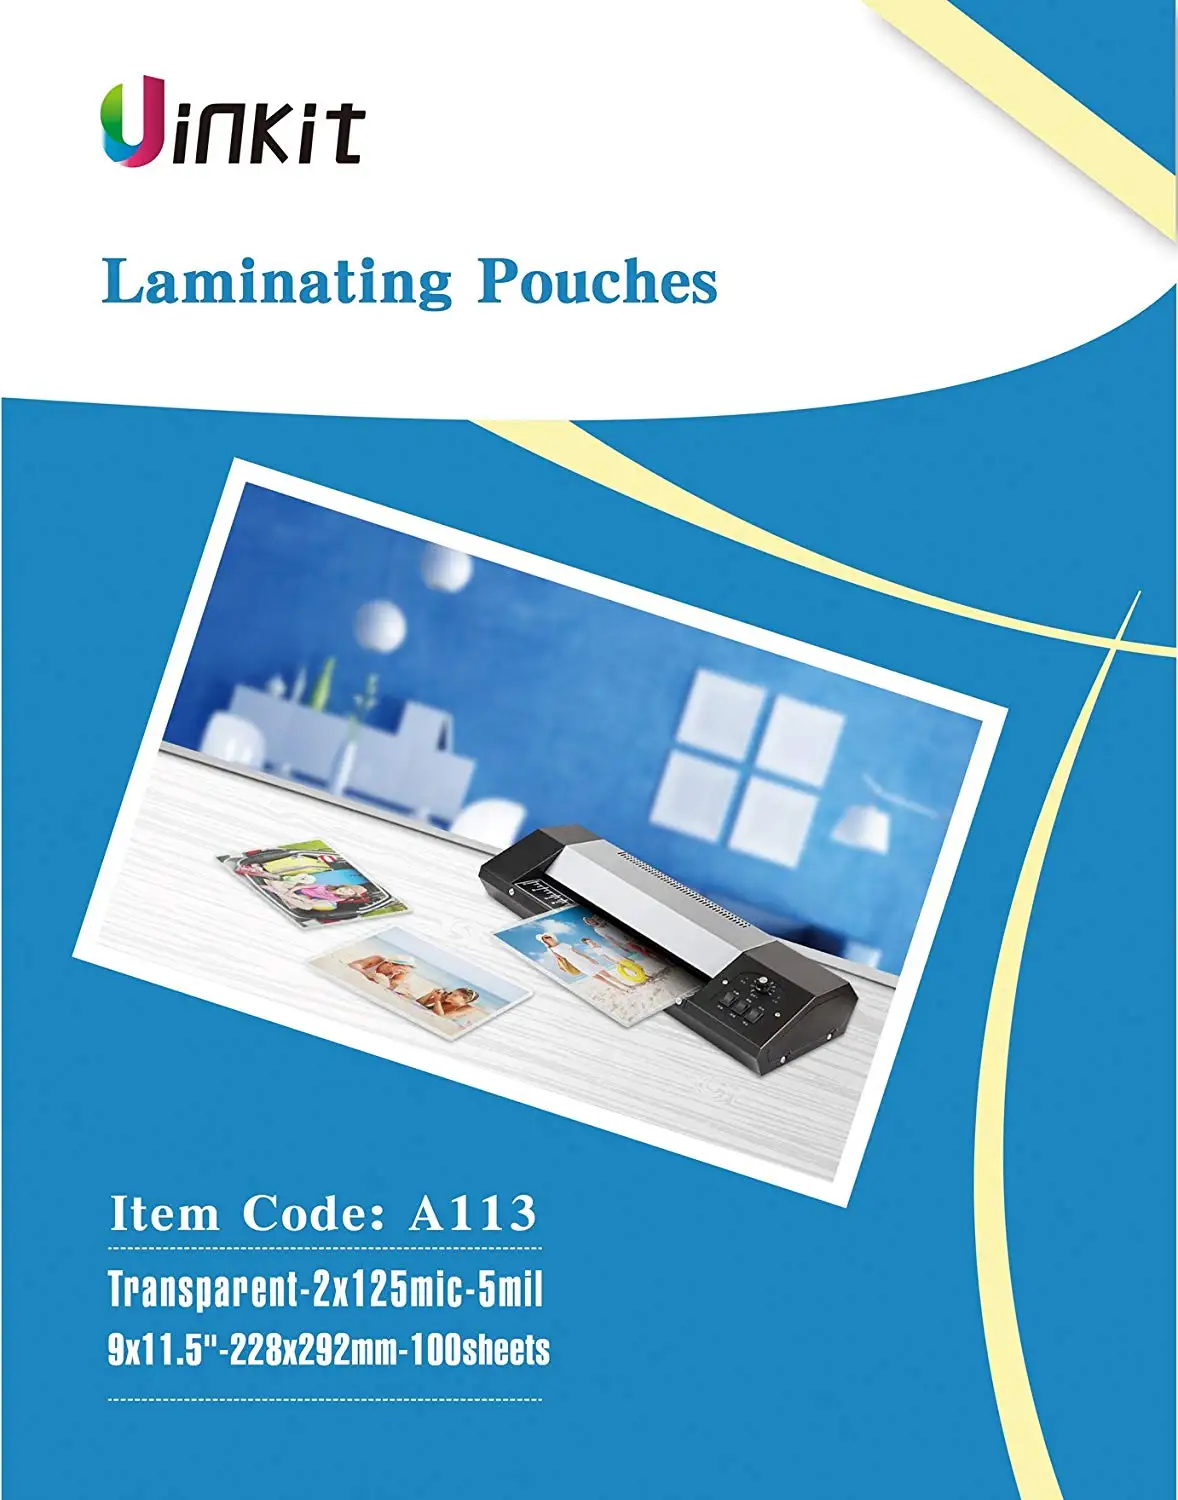 Konig 100 x A4 Laminating Pouches/Film/Sheets 100 microns